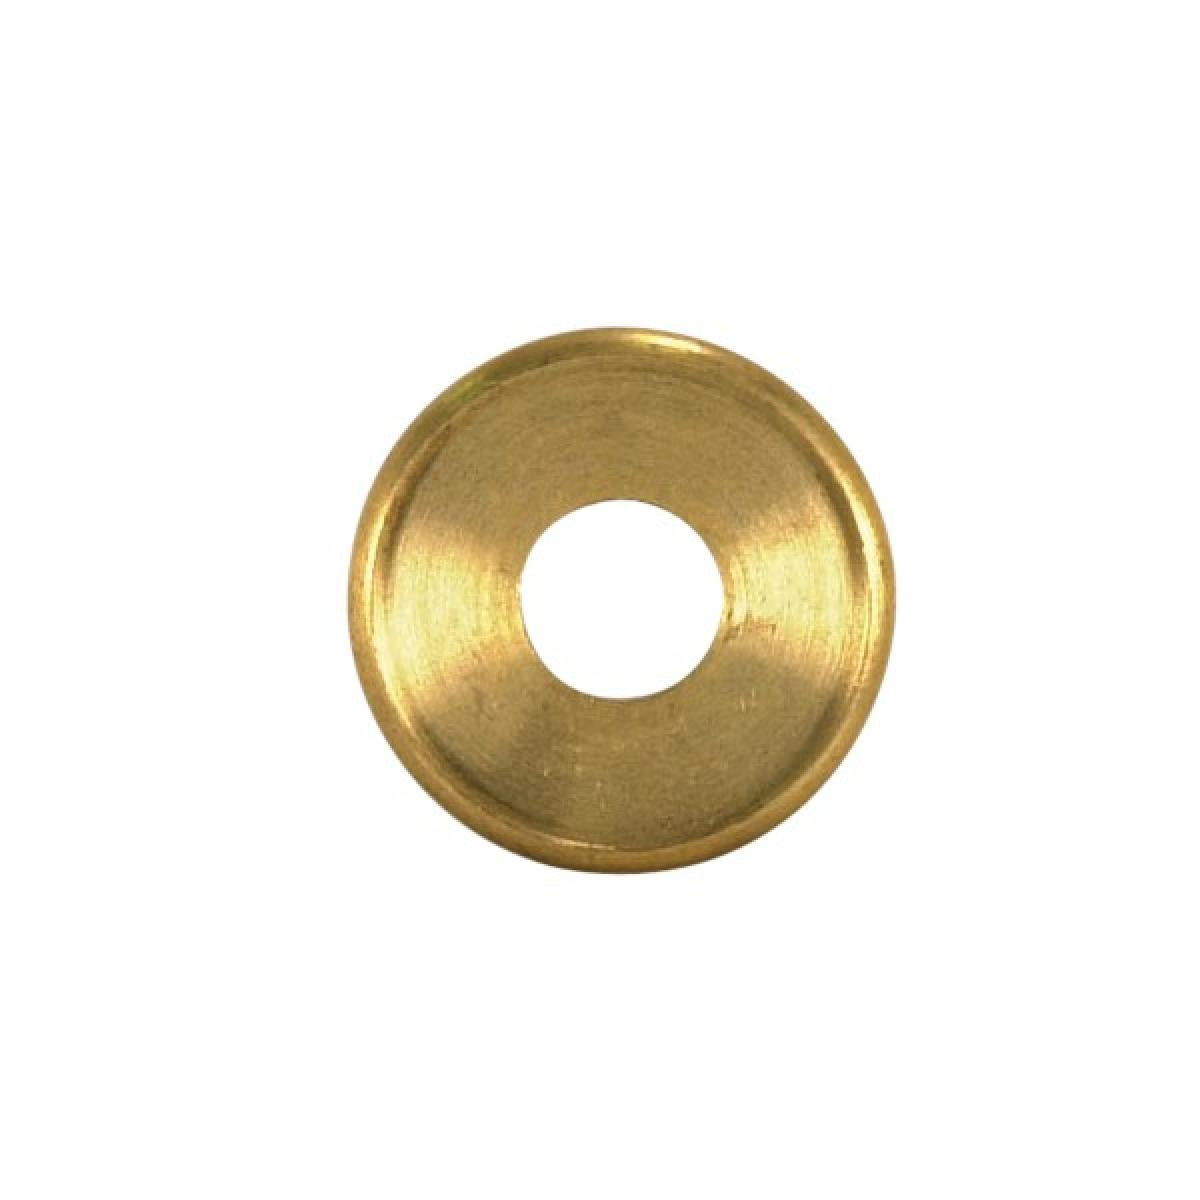 Satco 90-1607 Turned Brass Check Ring 1/8 IP Slip Unfinished 2" Diameter